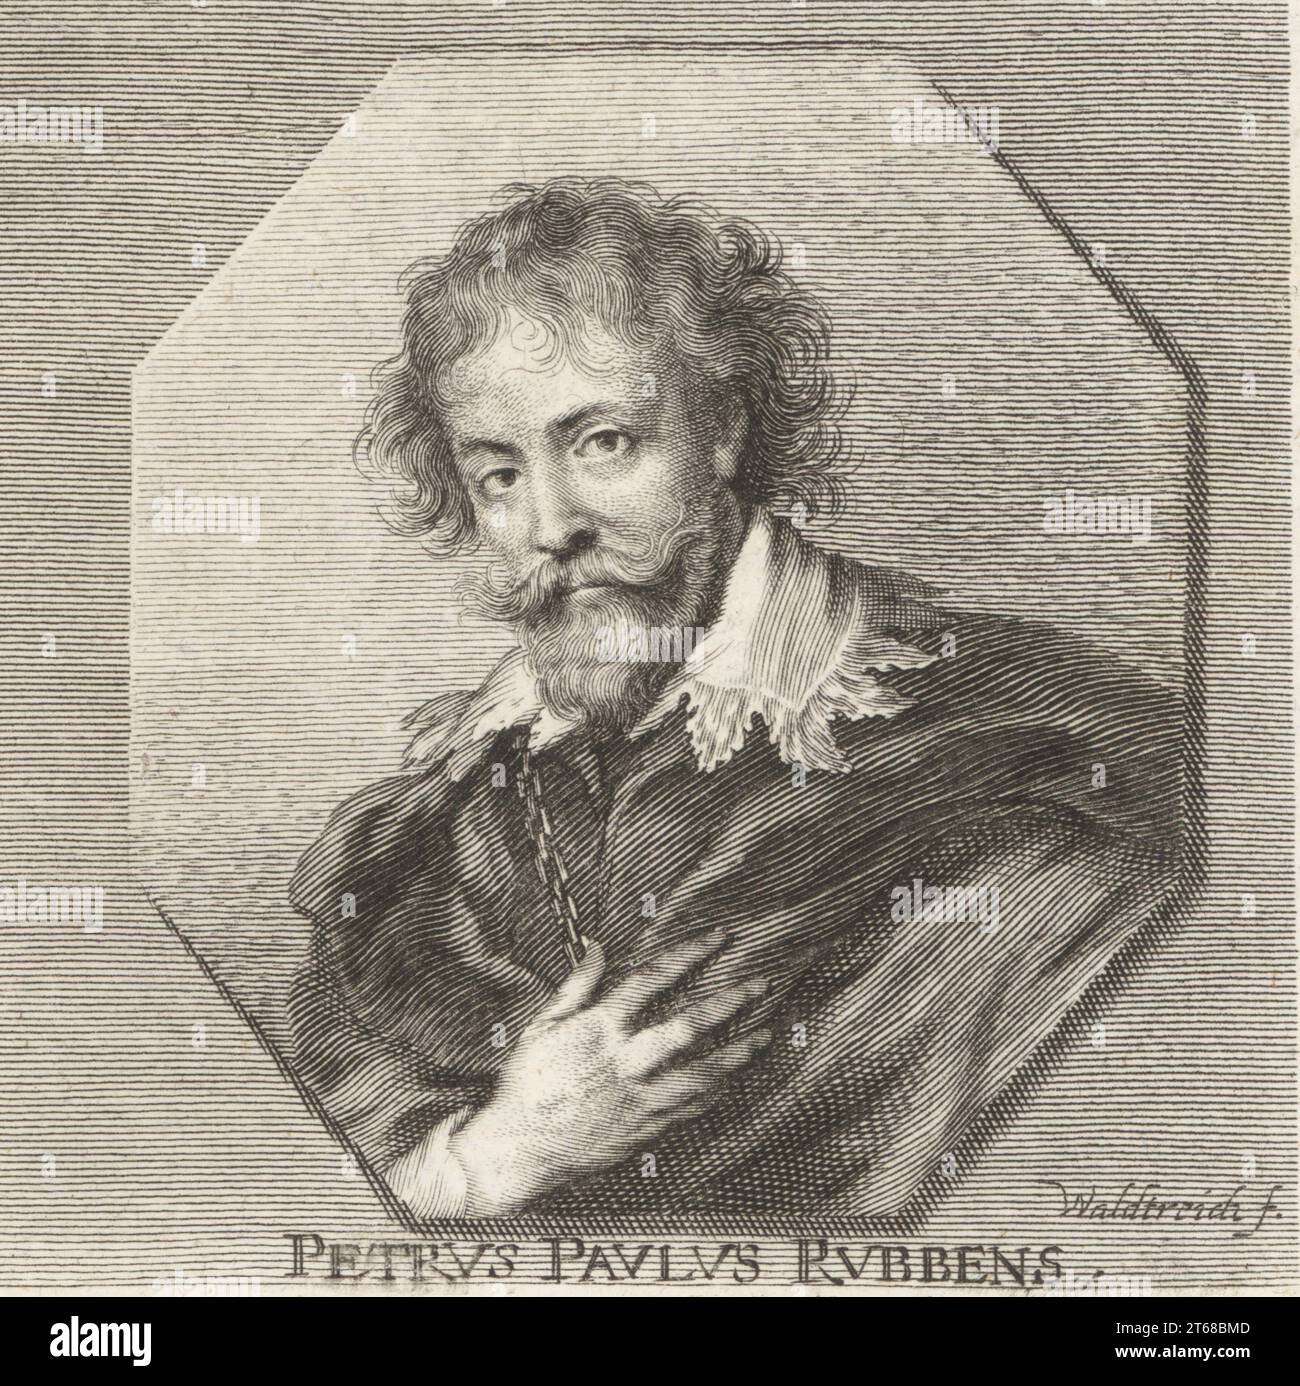 Sir Peter Paul Rubens, Flemish artist and diplomat from the Duchy of Brabant, 1577-1640. The most influential artist of the Flemish Baroque tradition. Petrus Paulus Rubbens. Copperplate engraving by Johann Georg Waldreich after an illustration by Joachim von Sandrart from his LAcademia Todesca, della Architectura, Scultura & Pittura, oder Teutsche Academie, der Edlen Bau- Bild- und Mahlerey-Kunste, German Academy of Architecture, Sculpture and Painting, Jacob von Sandrart, Nuremberg, 1675. Stock Photo